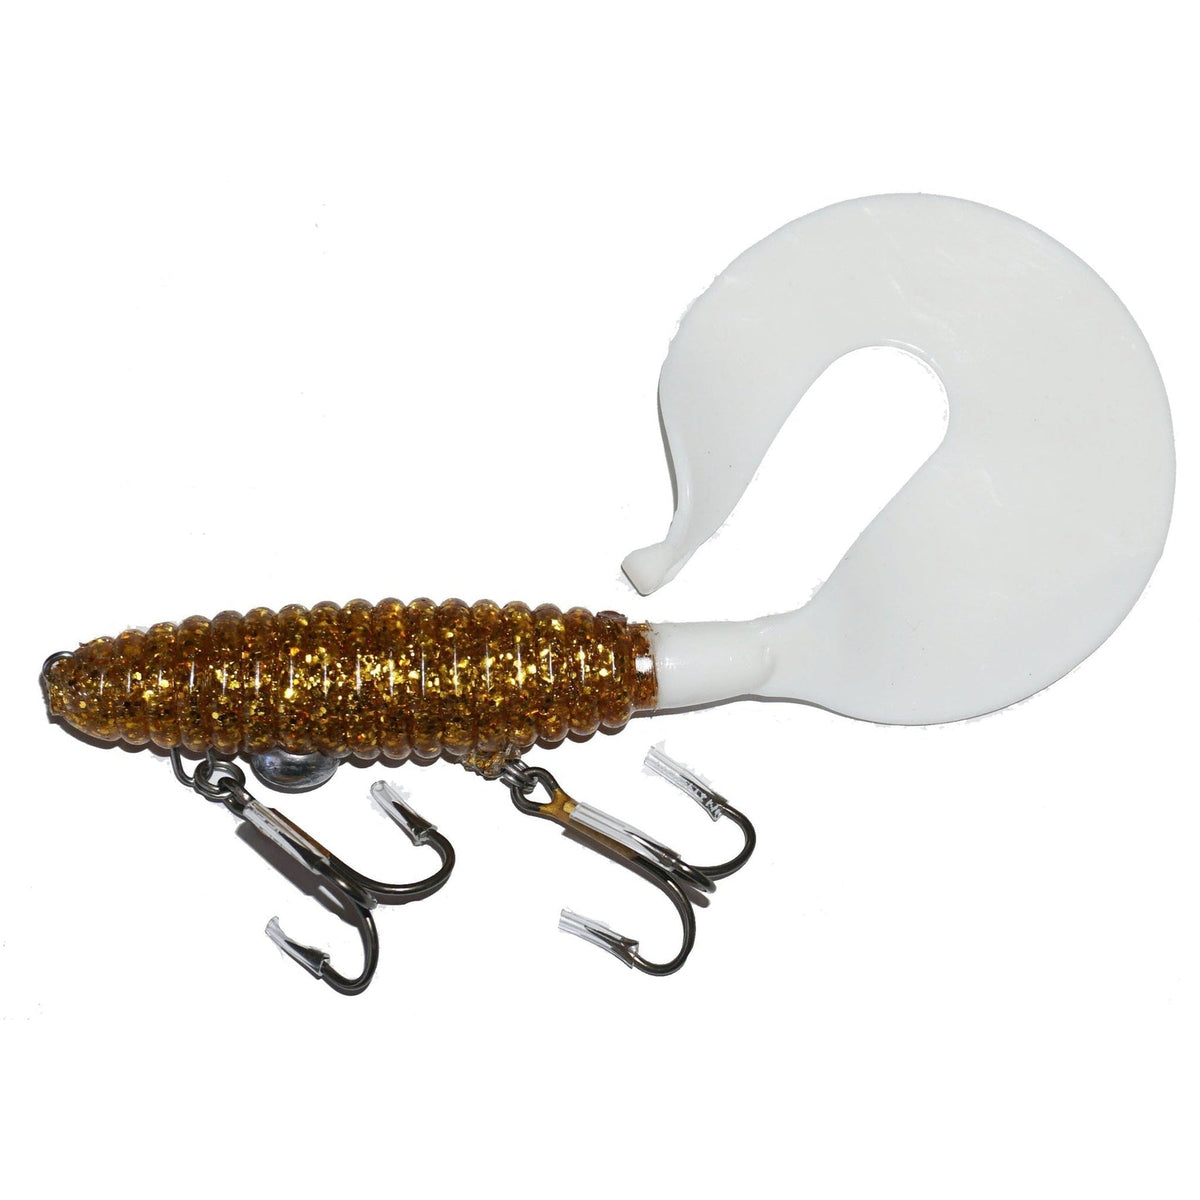 MuskieFIRST  Weedless daredevle/making a spoon weedless » Lures,Tackle,  and Equipment » Muskie Fishing